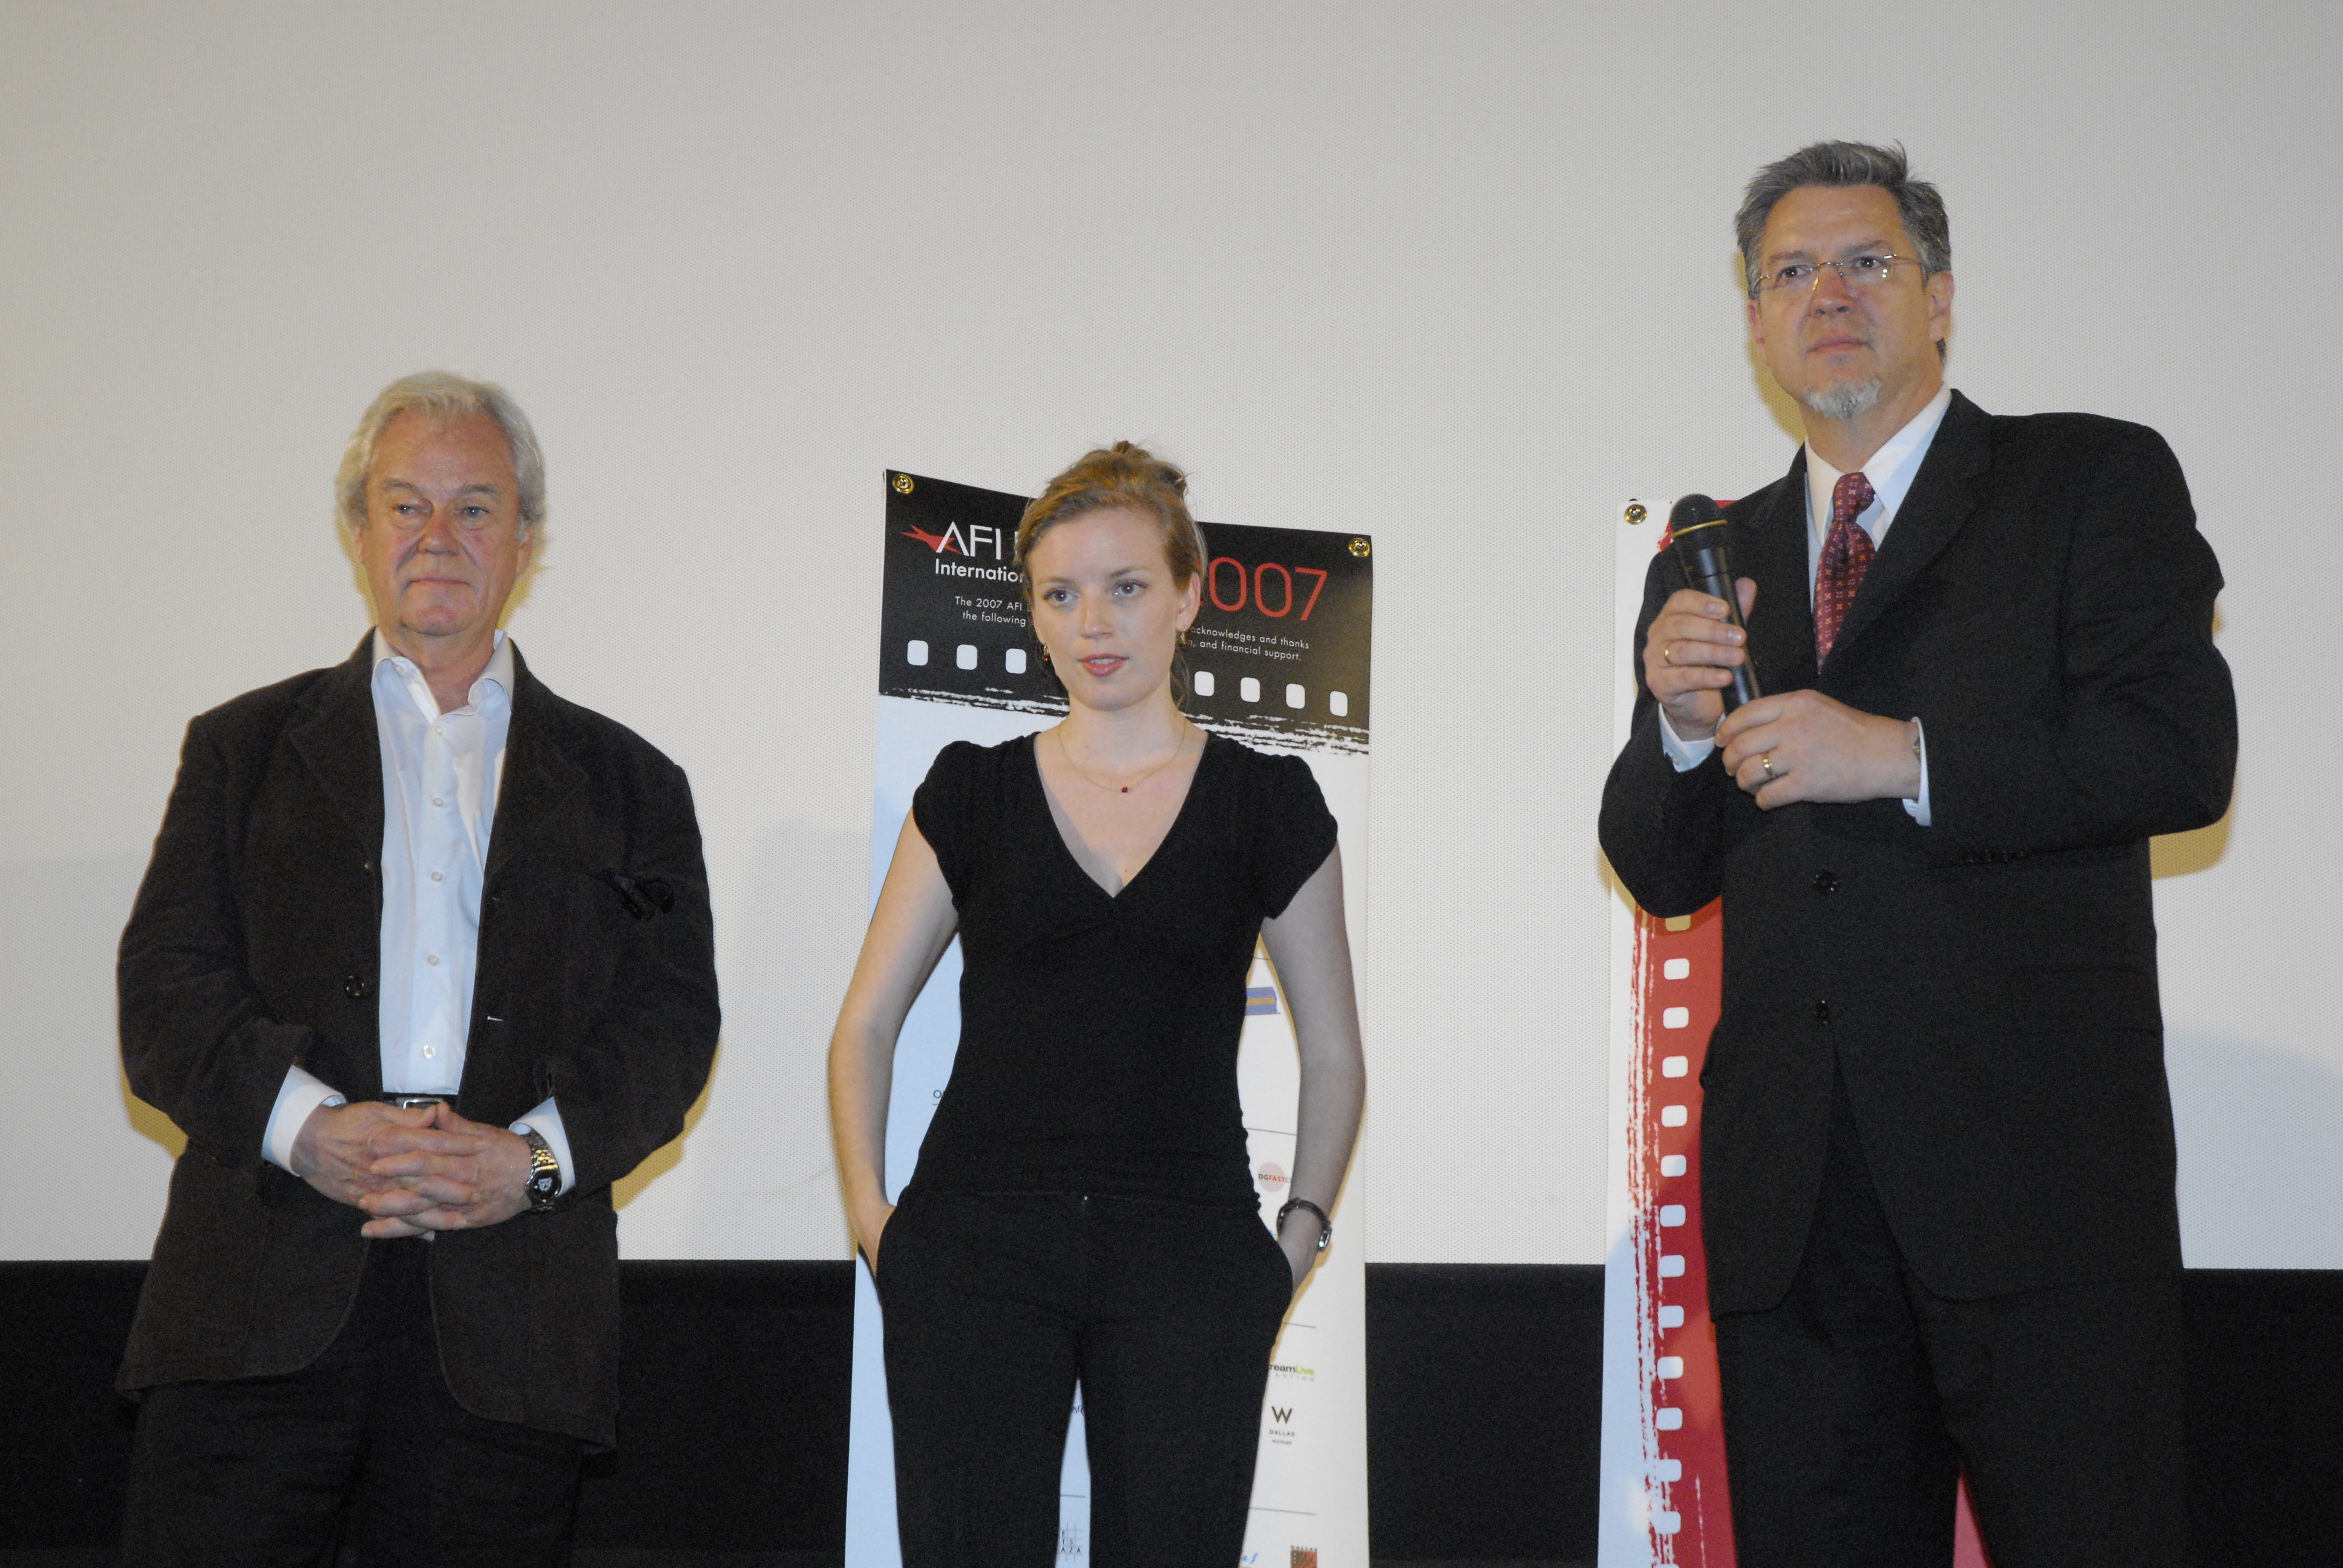 Gordon Pinsent, Director Sarah Polley and Michael Cain at the AFI DALLAS 2007 Closing NIght FIlm AWAY FROM HER.